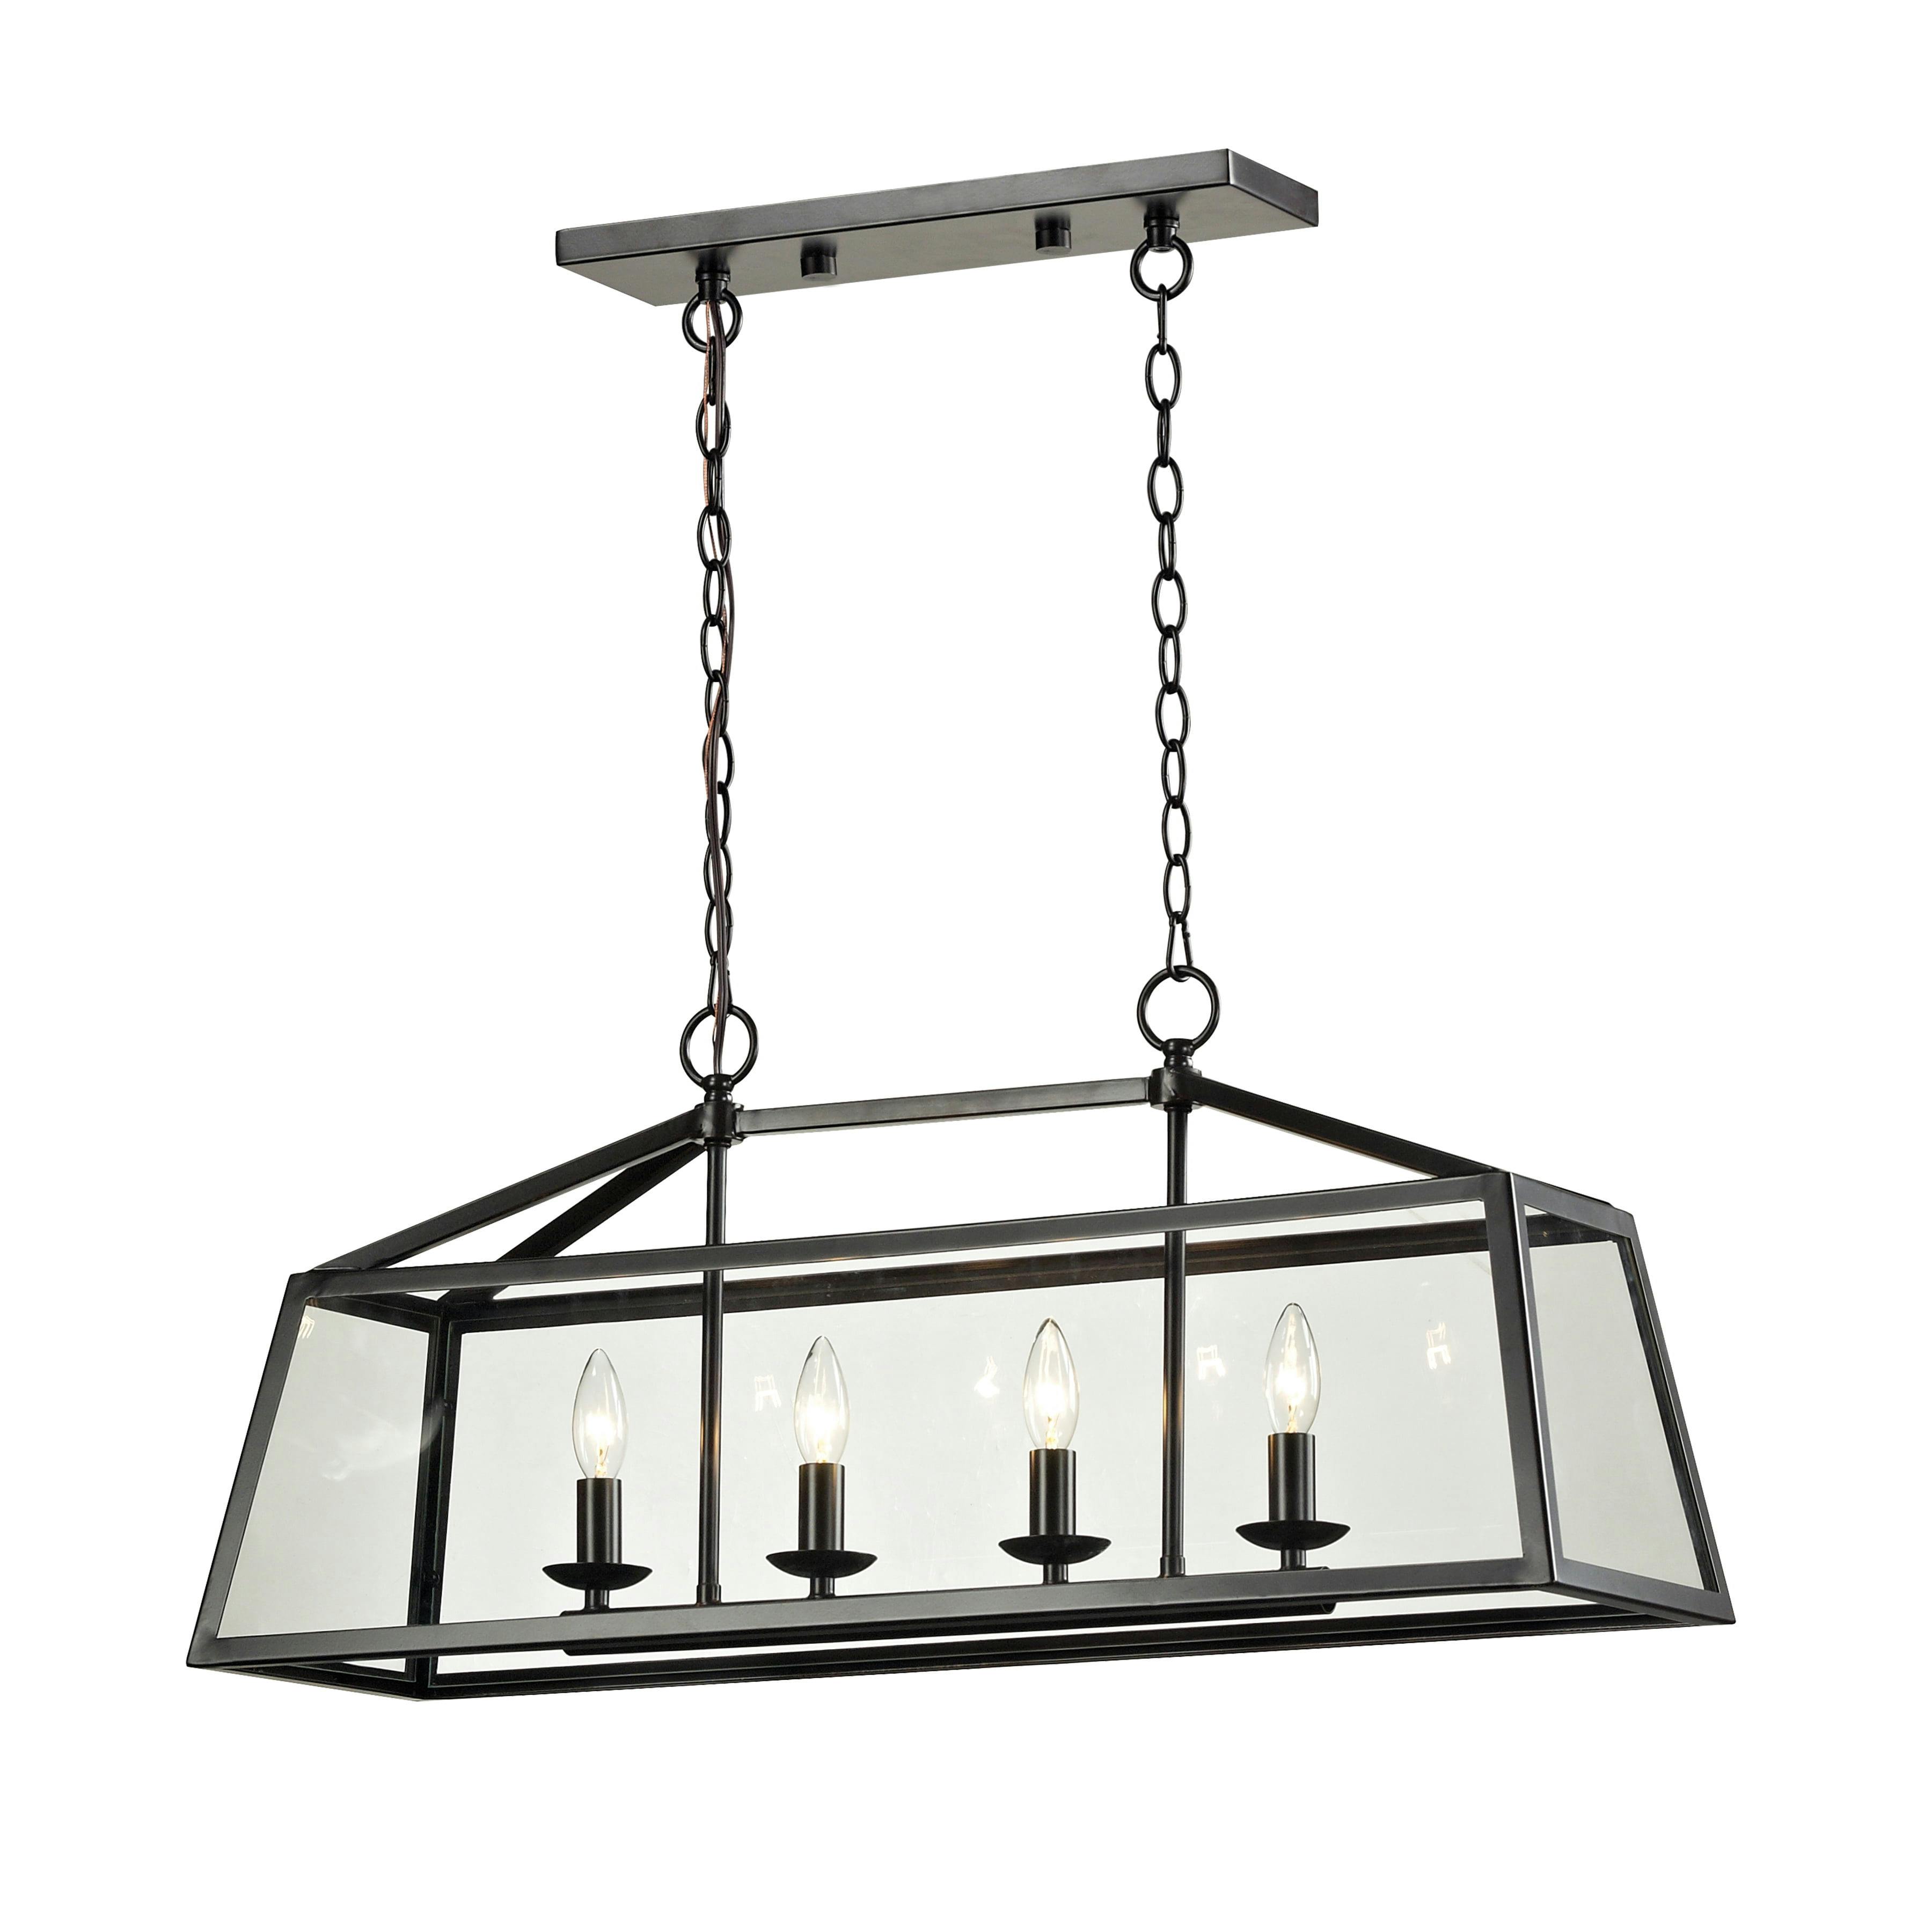 Alanna Classic 32" Oil Rubbed Bronze and Glass Linear Chandelier